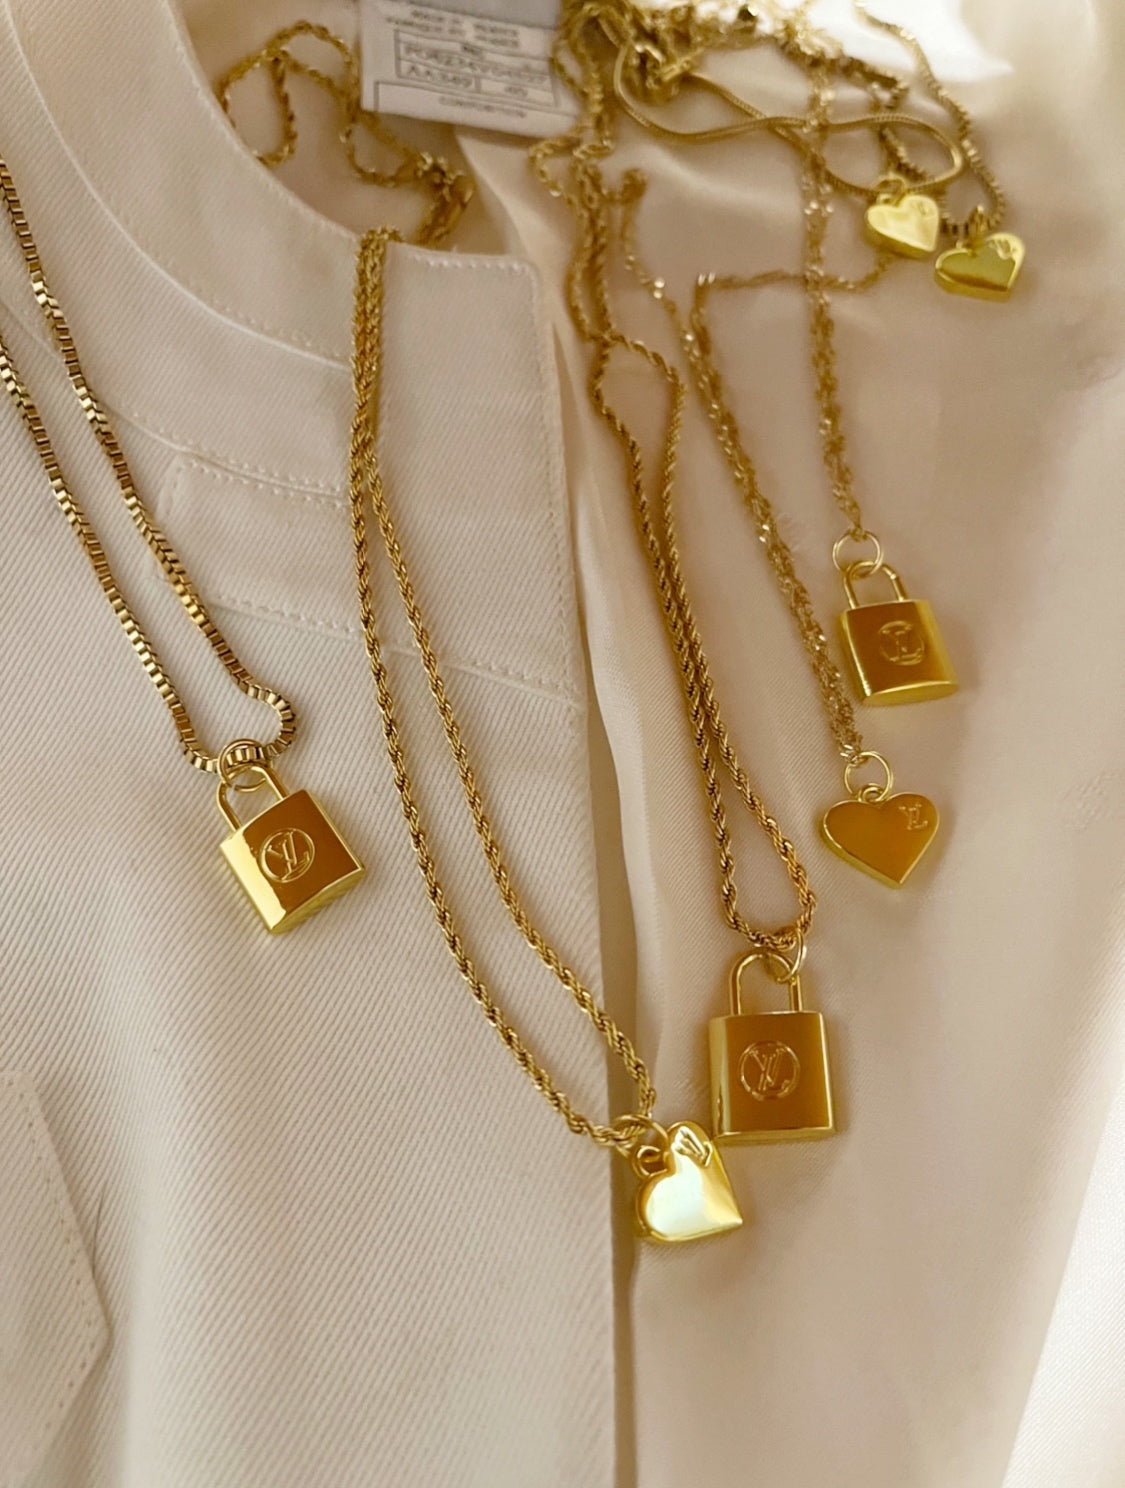 [Used LV Necklace] Certainty Louis Vuitton Monogram Charm Necklace